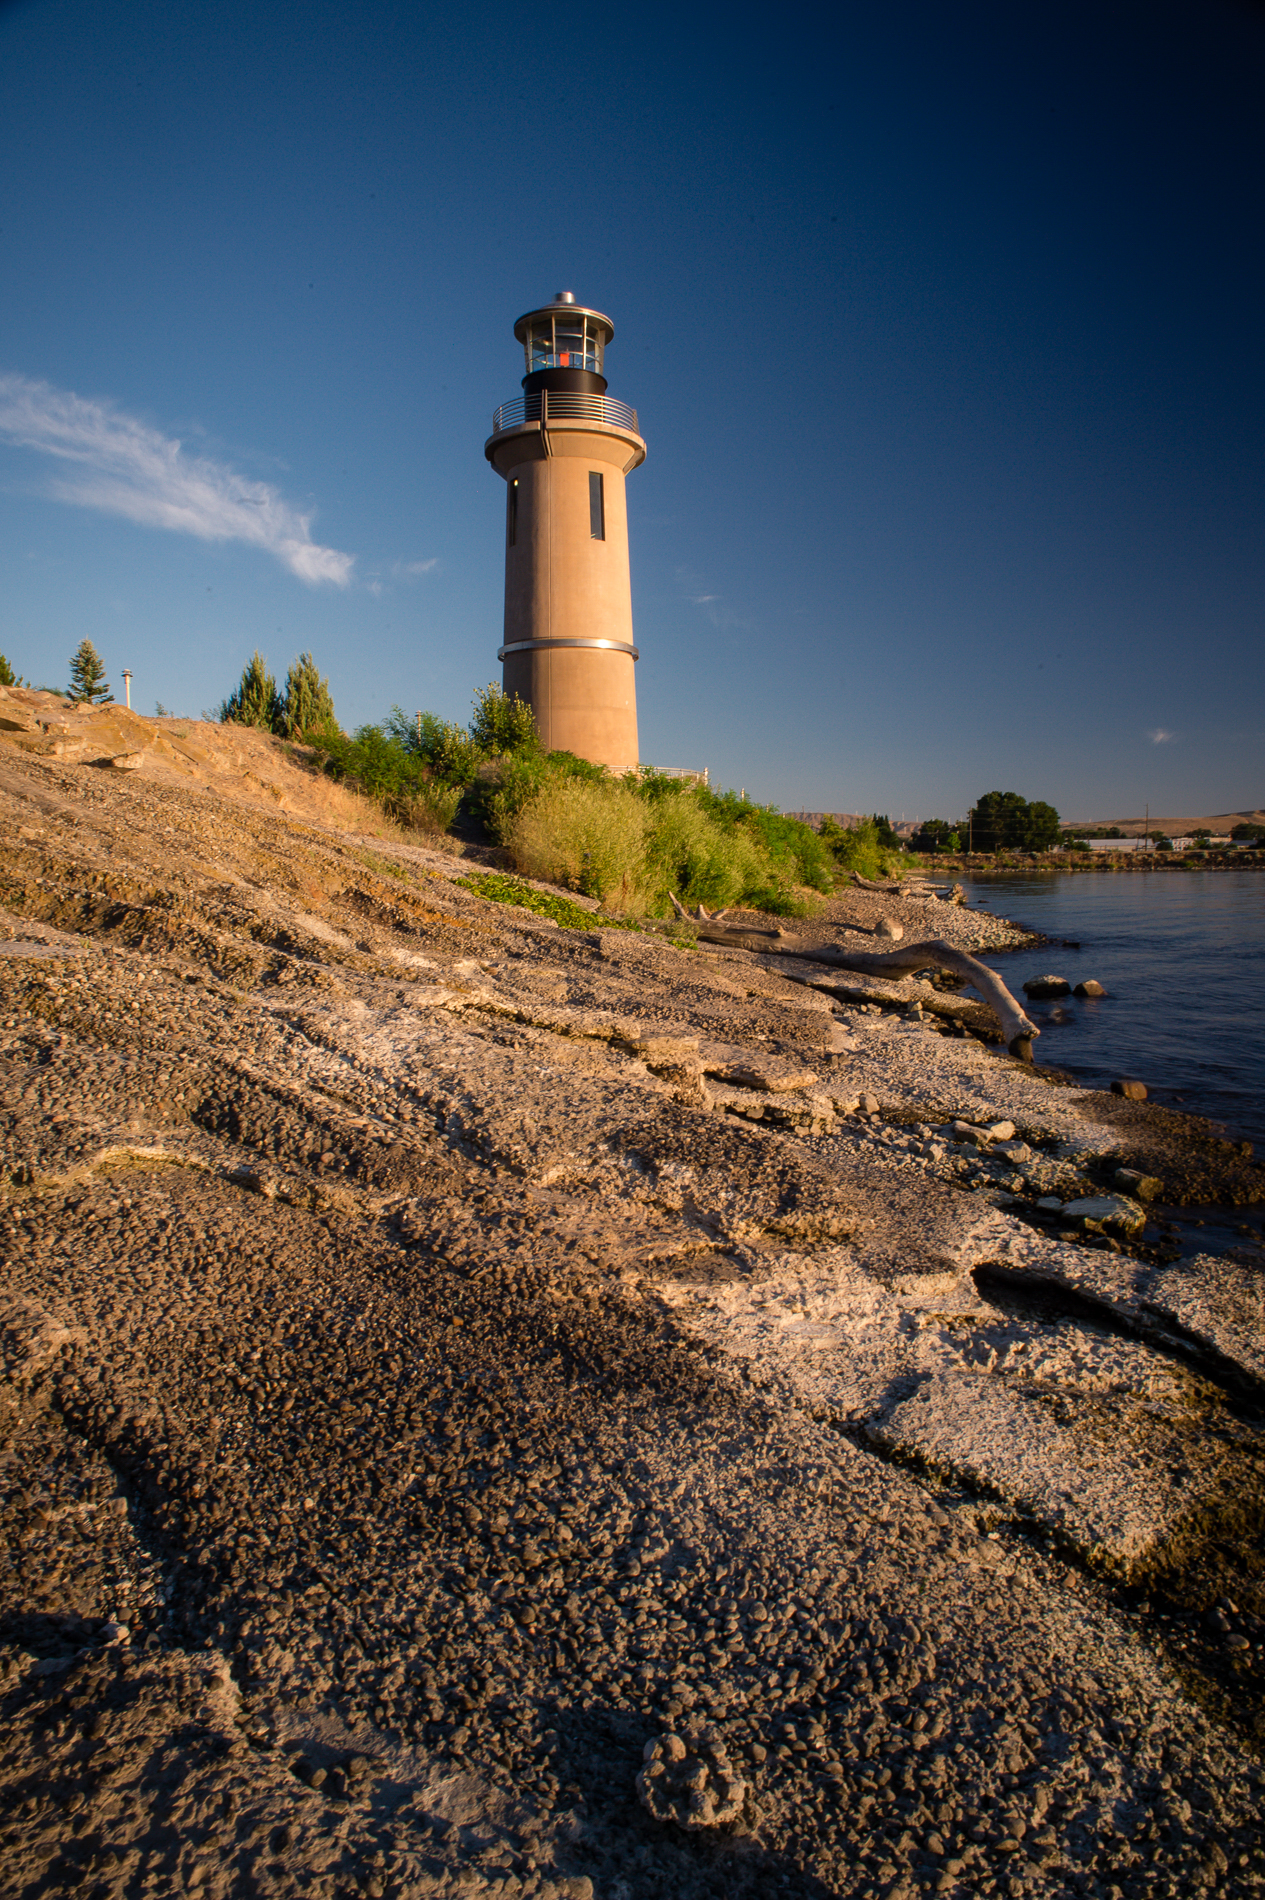 The Lighthouse at Clover Island